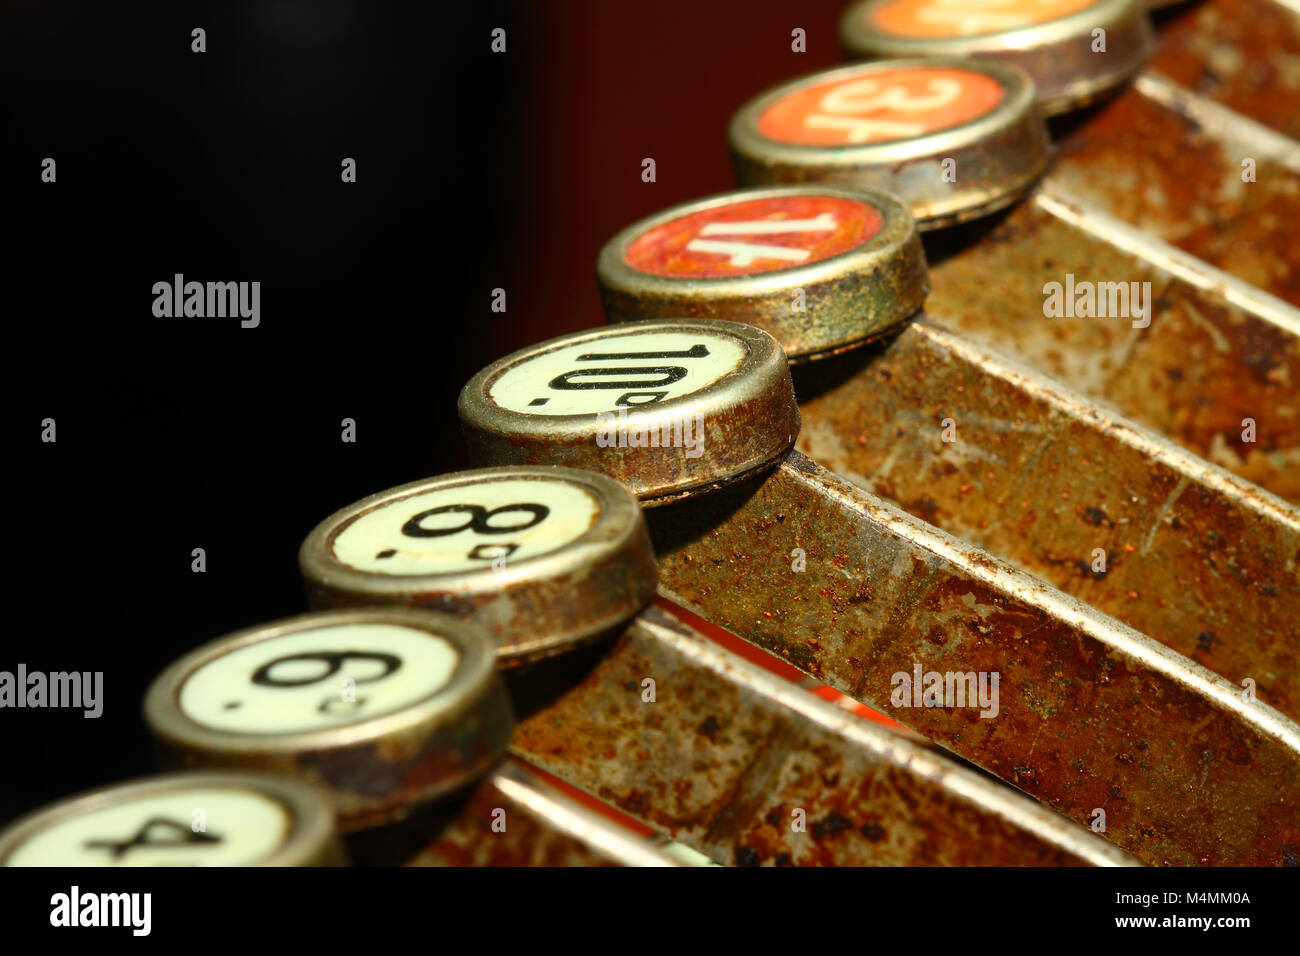 Buttons on a till for pre decimal united kingdom money Stock Photo